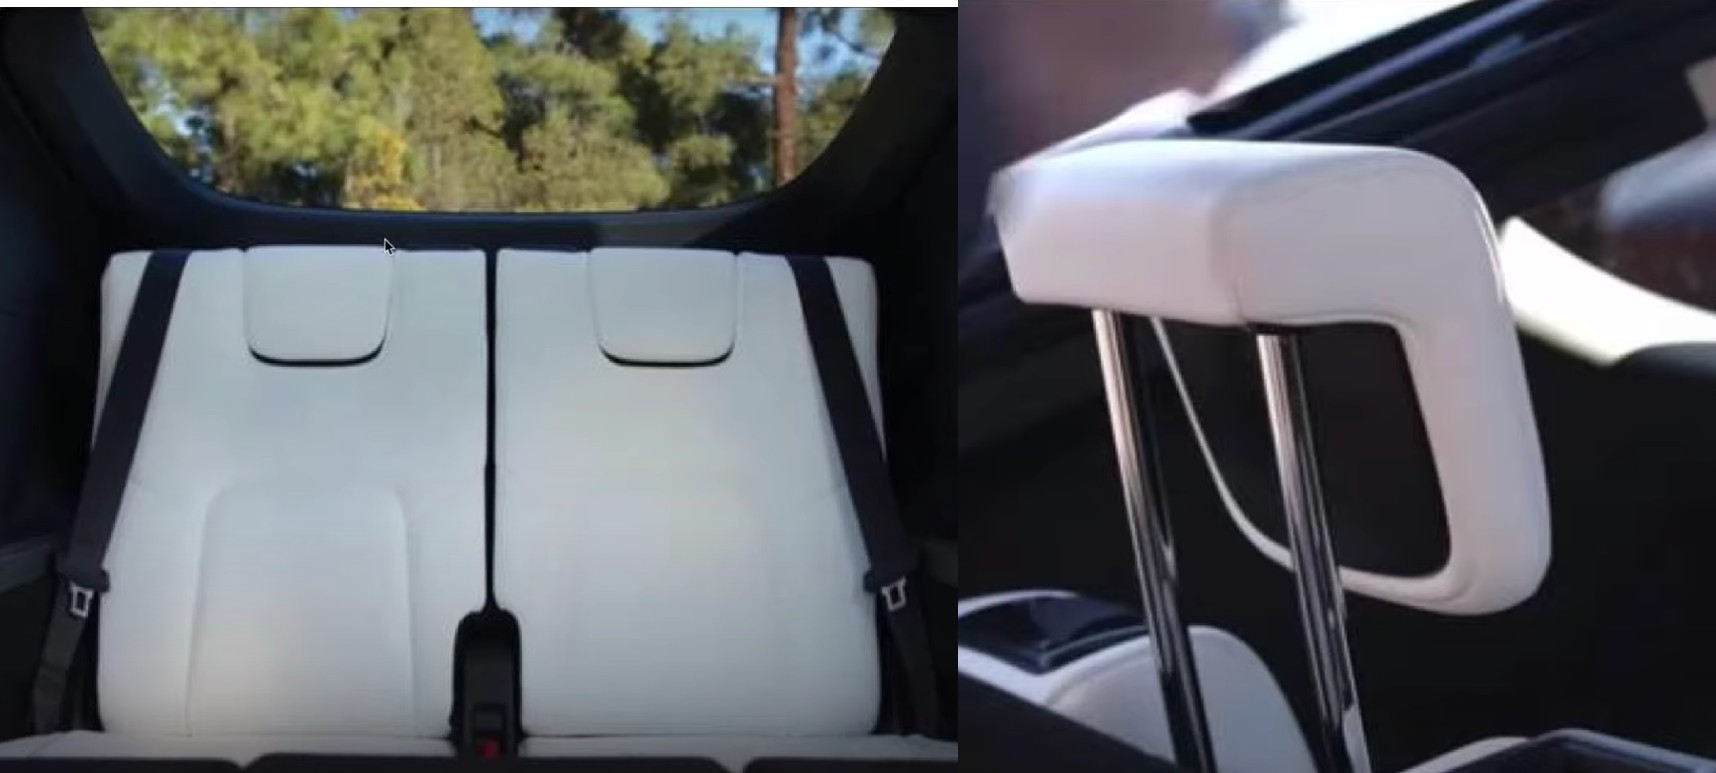 tesla model y 7 seat 3rd row pictures